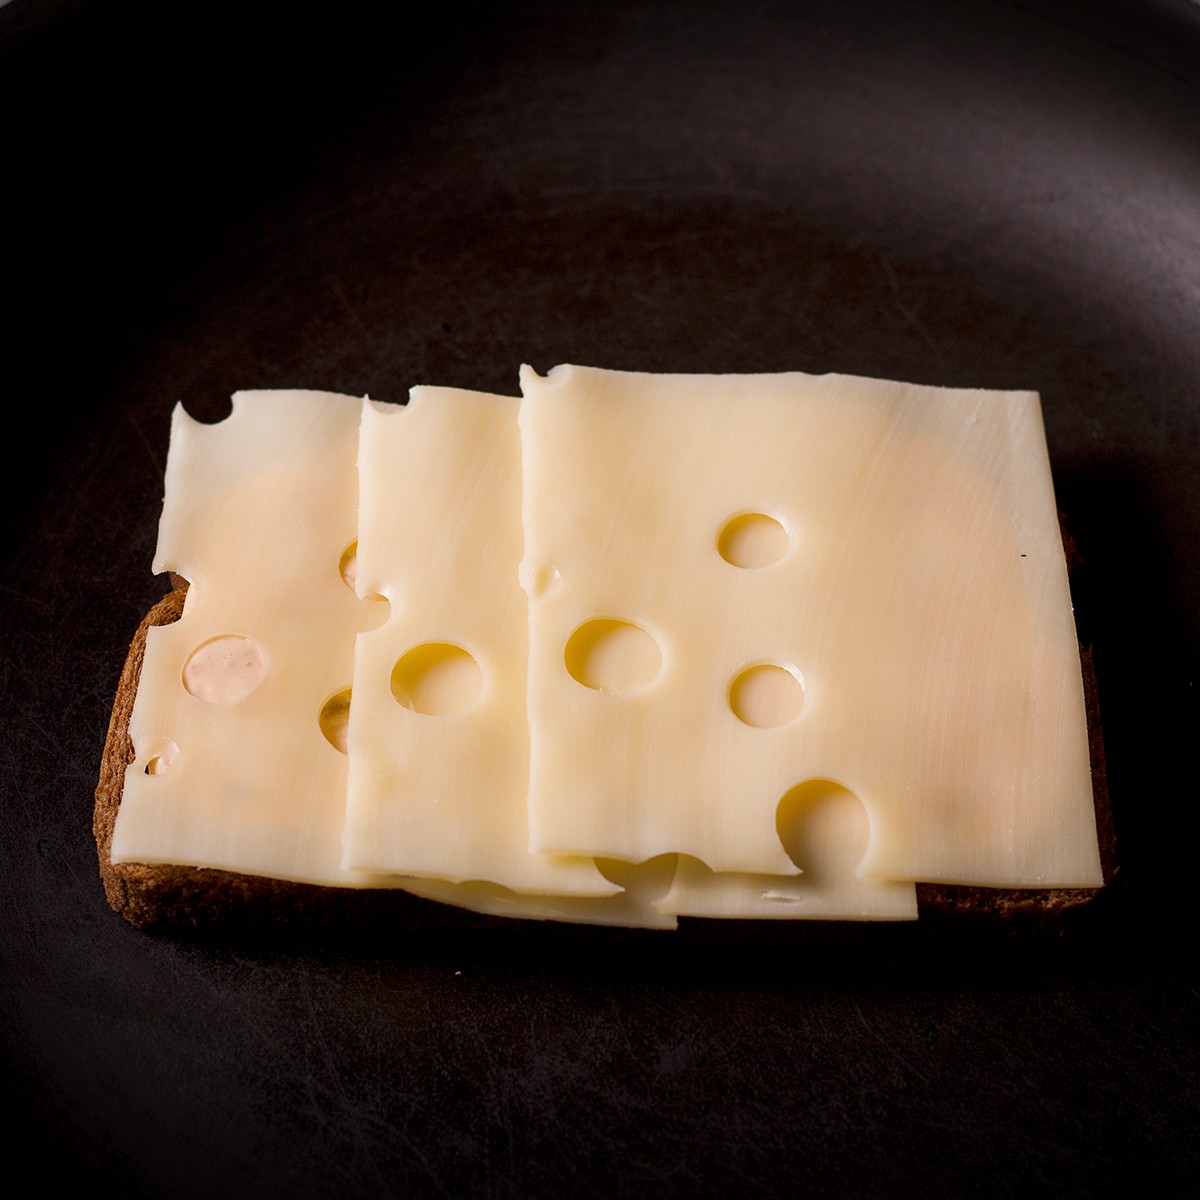 A piece of Rye bread spread with Russian dressing and layered with Swiss cheese in a skillet.